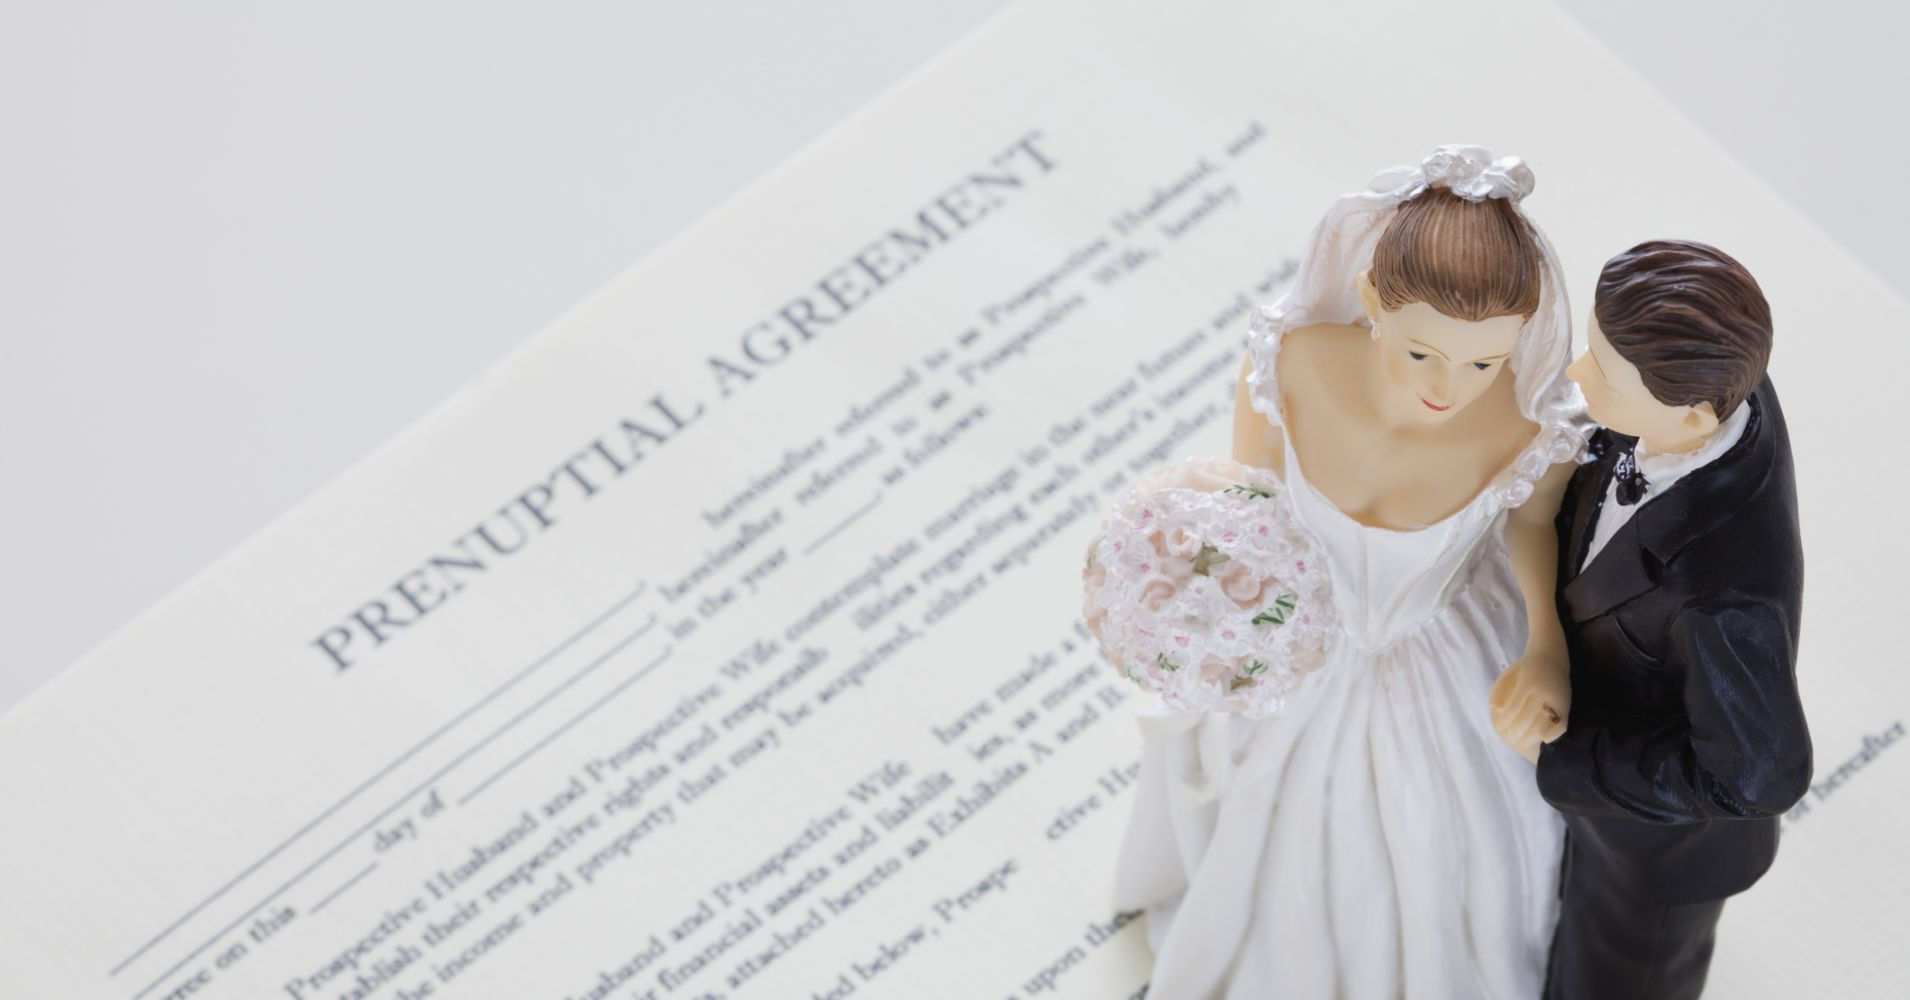 How Much Does A Prenuptial Agreement Cost Heres How To Bulletproof Your Prenuptial Agreement